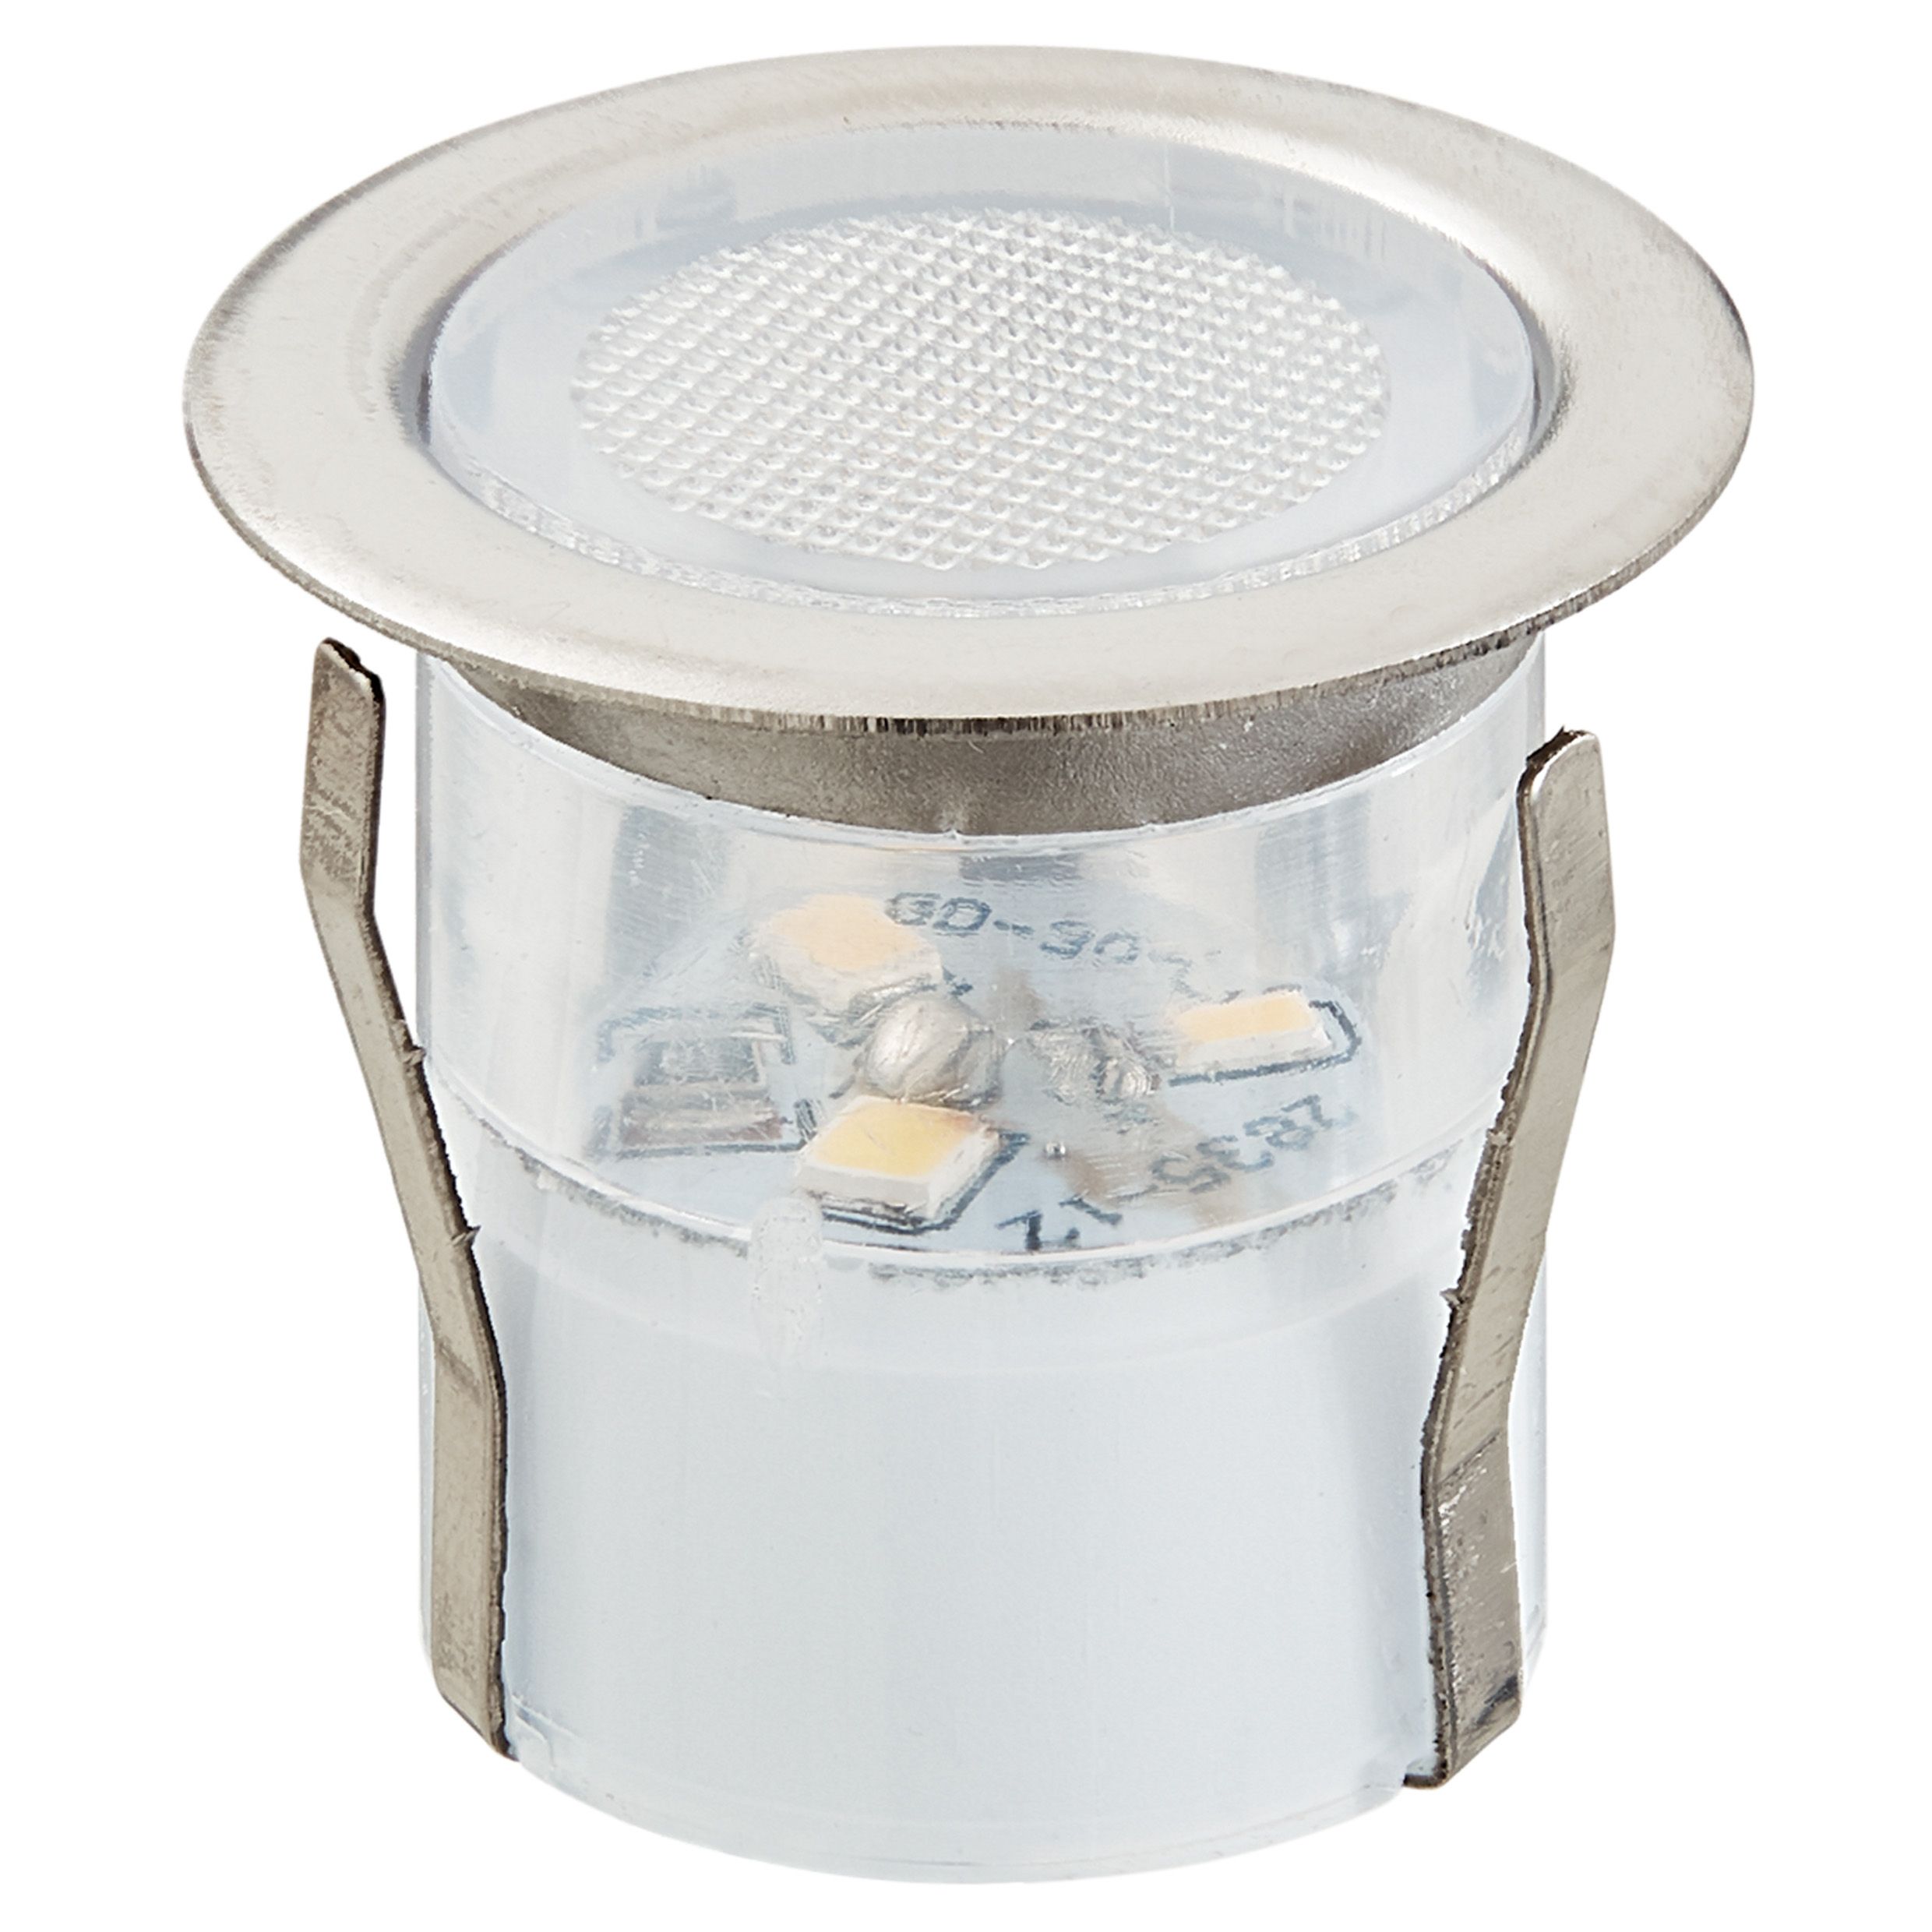 GoodHome Coldstrip Stainless steel Mains-powered Neutral white LED Round Deck light, Pack of 10